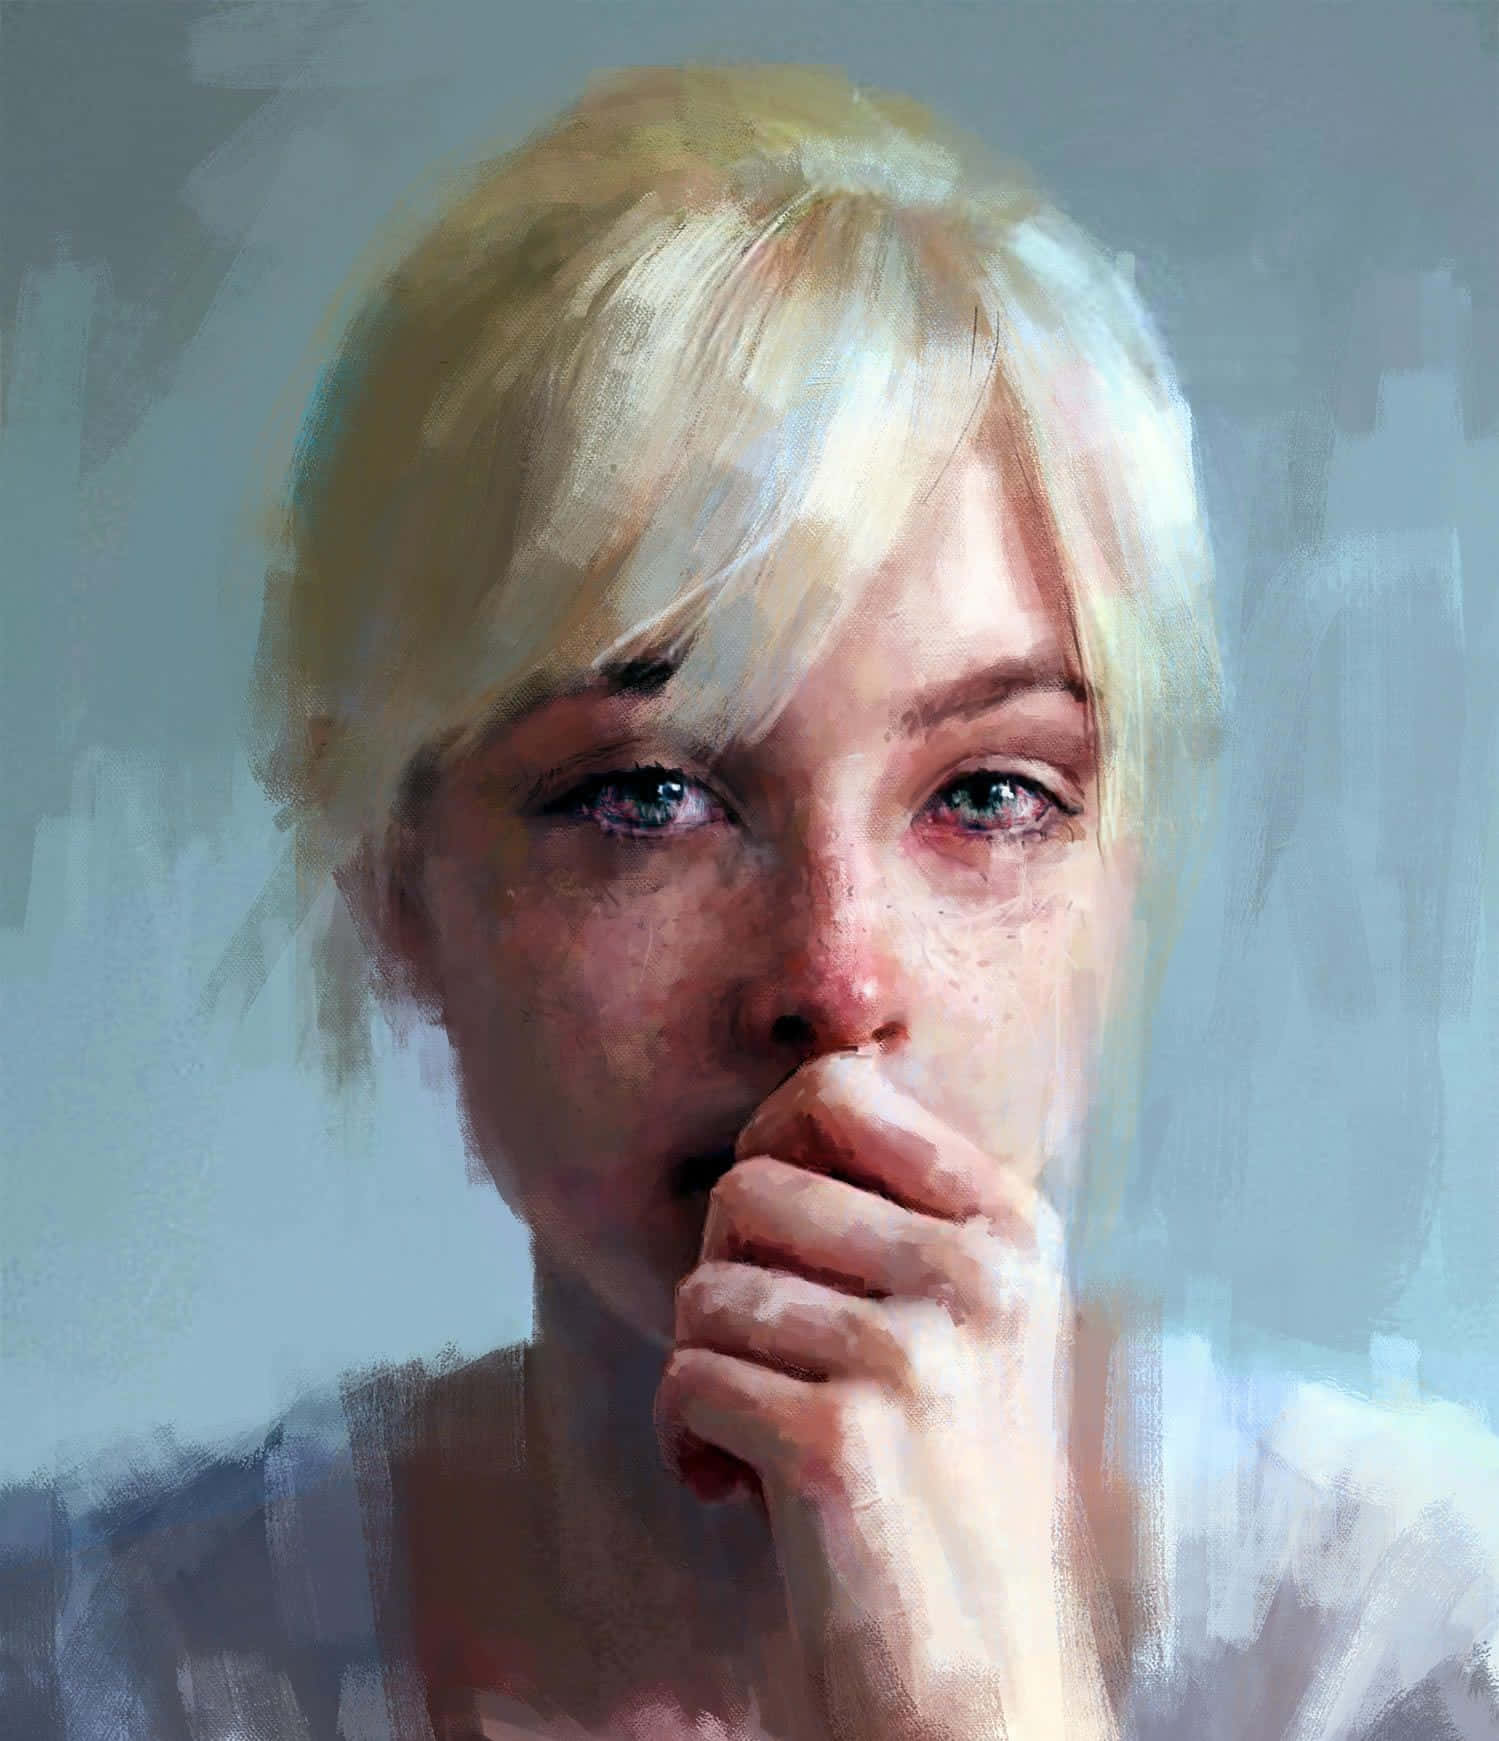 Sad Person Girl Crying Painting Picture